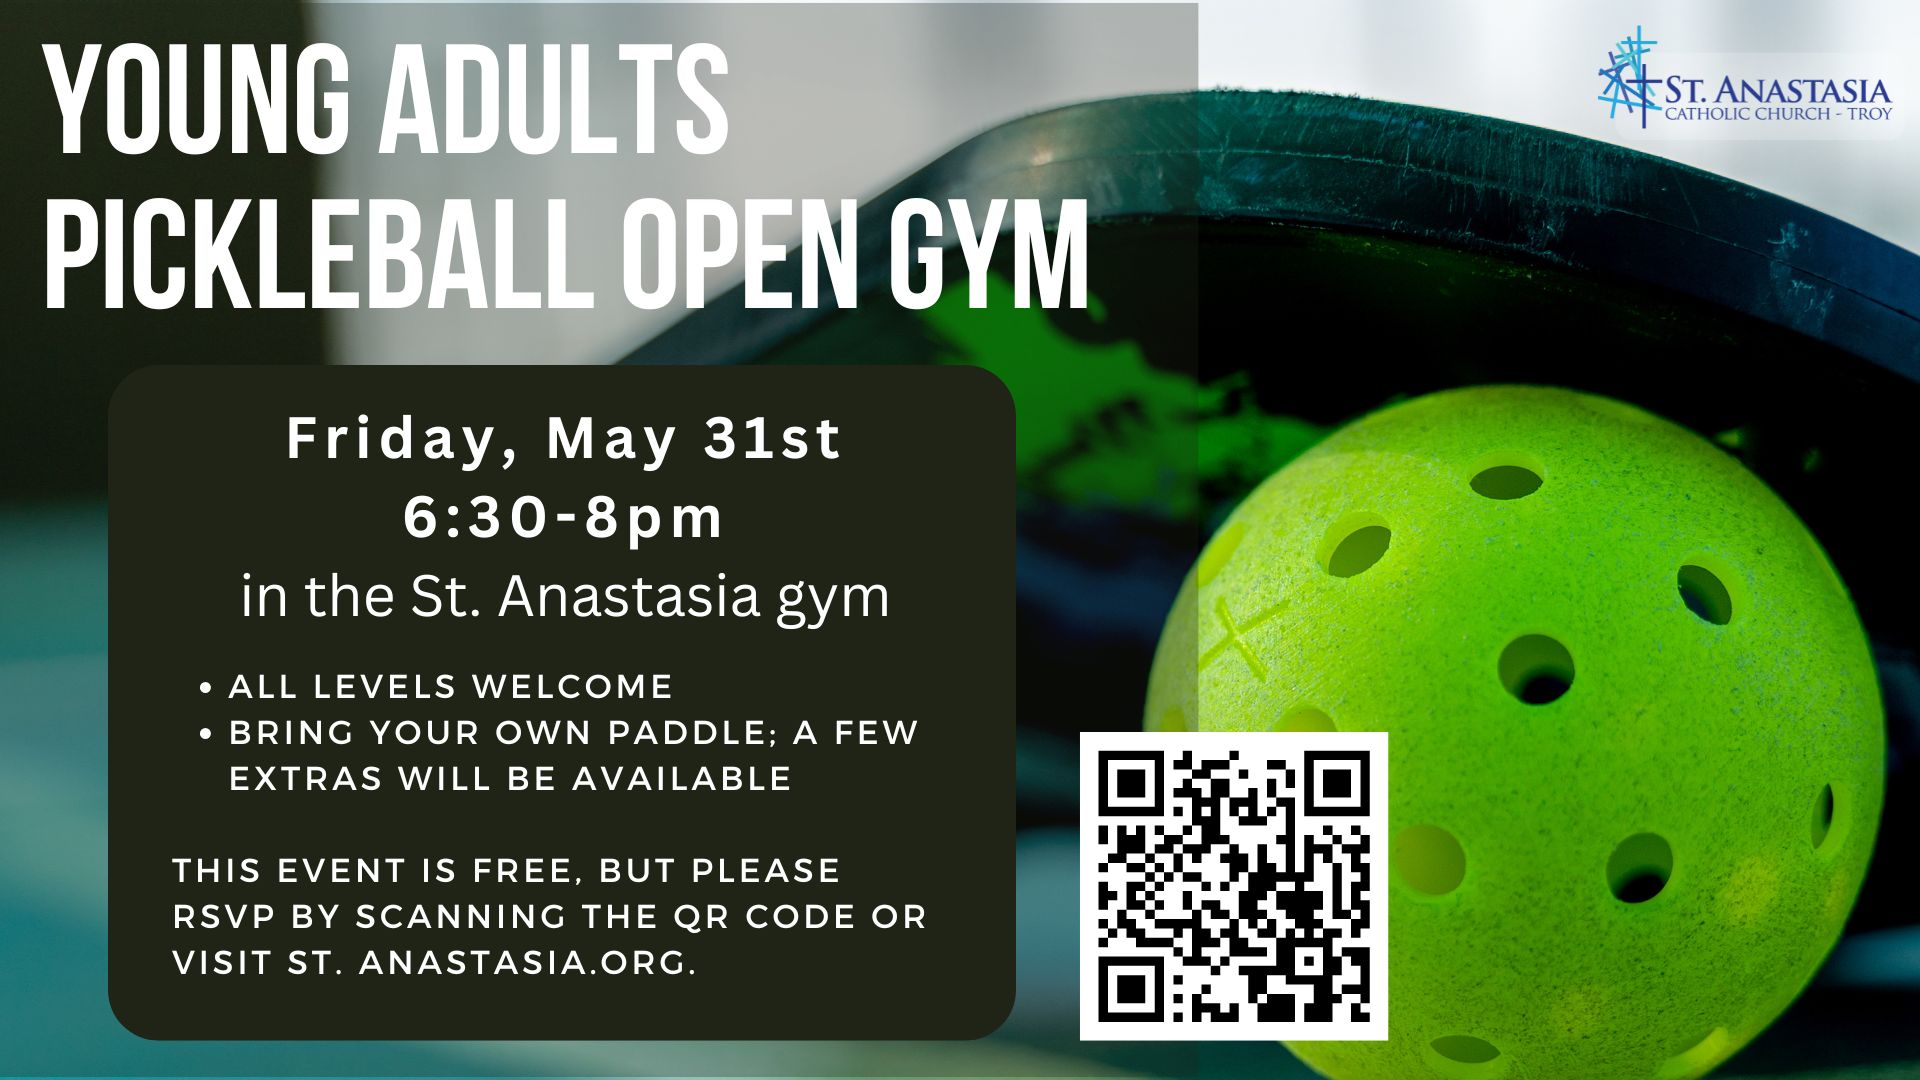 Young Adults Pickleball Open Gym